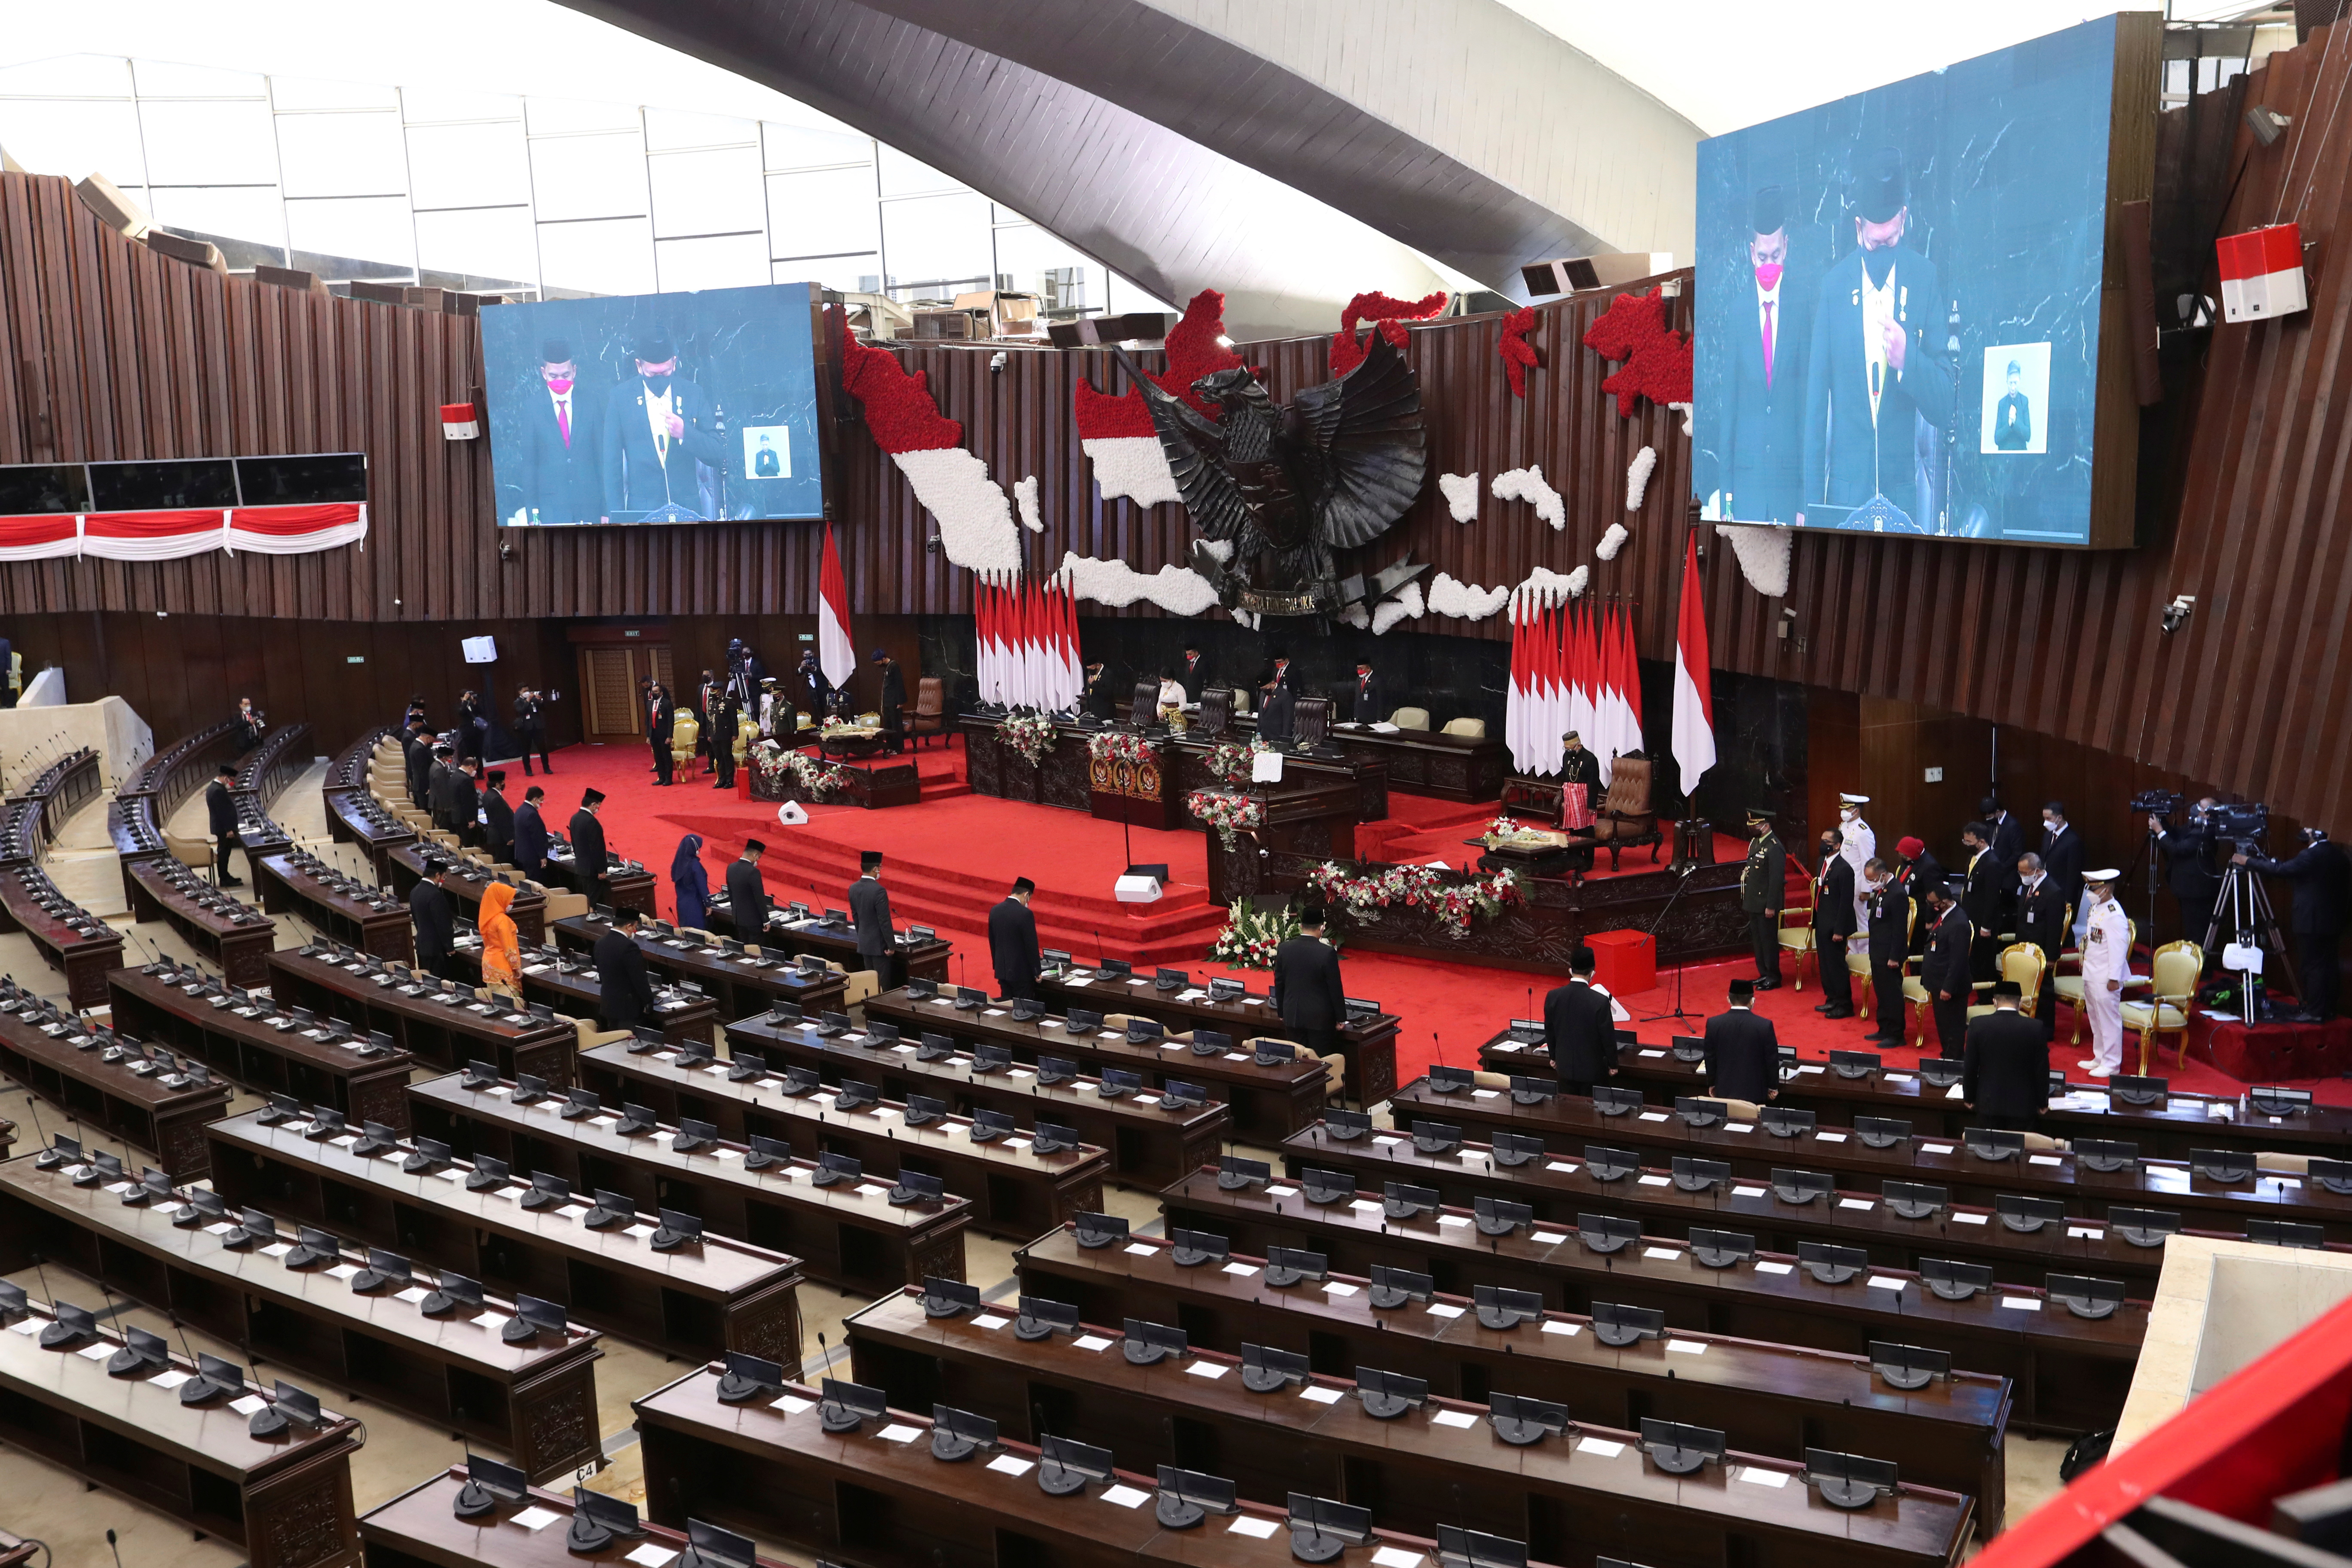 Seats at the main assembly room at the parliament building are left largely empty during the delivery of the annual State of the Nation Address by Indonesian President Joko Widodo in Jakarta